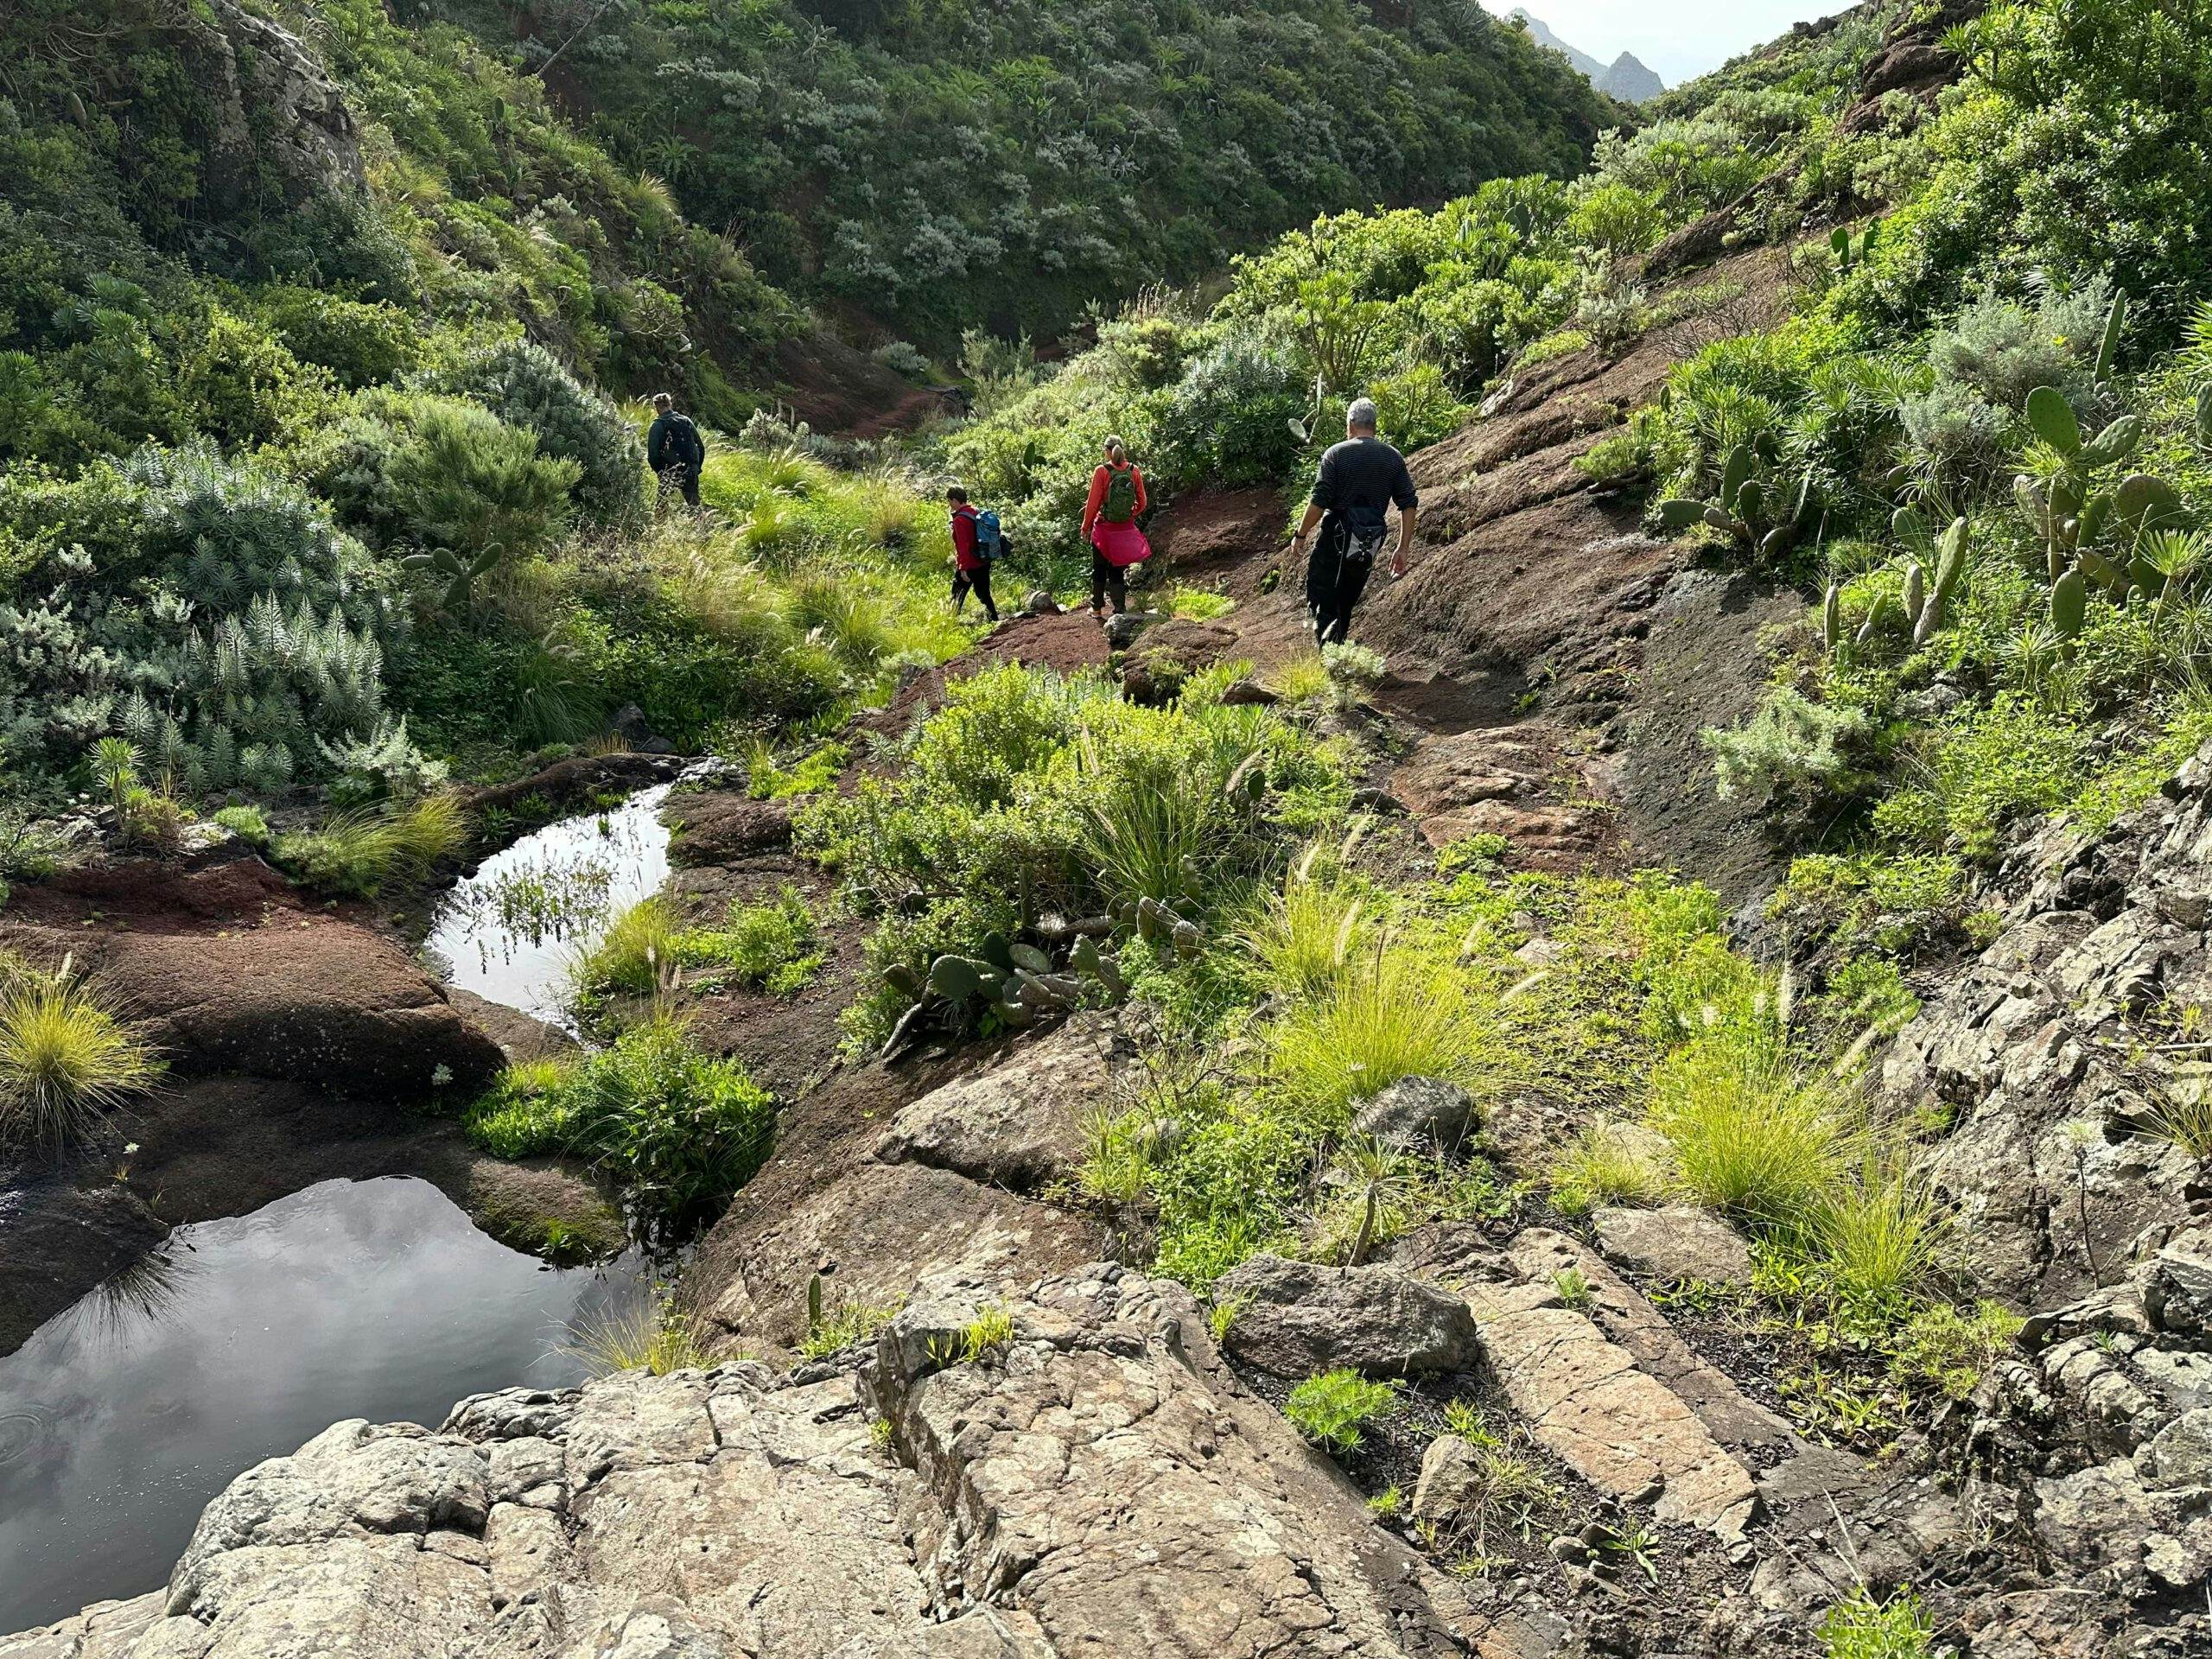 Hiking trail through the barranco with crossing of the slopes just above the Canal Chabuco - hiking trail up to Casas de la Cumbre